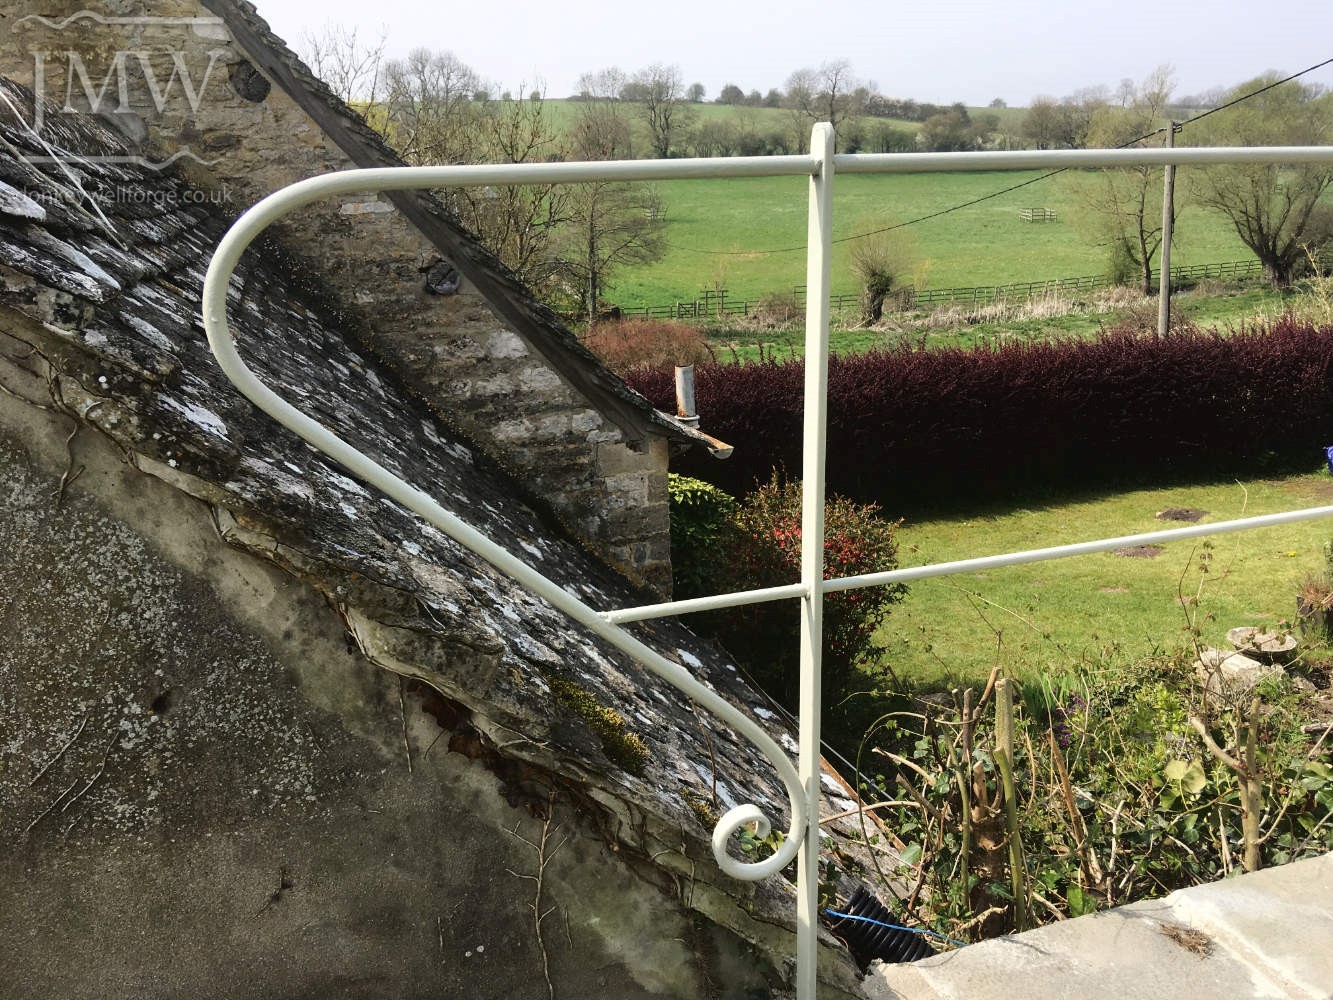 cotswold-garden-metalwork-railings-forged